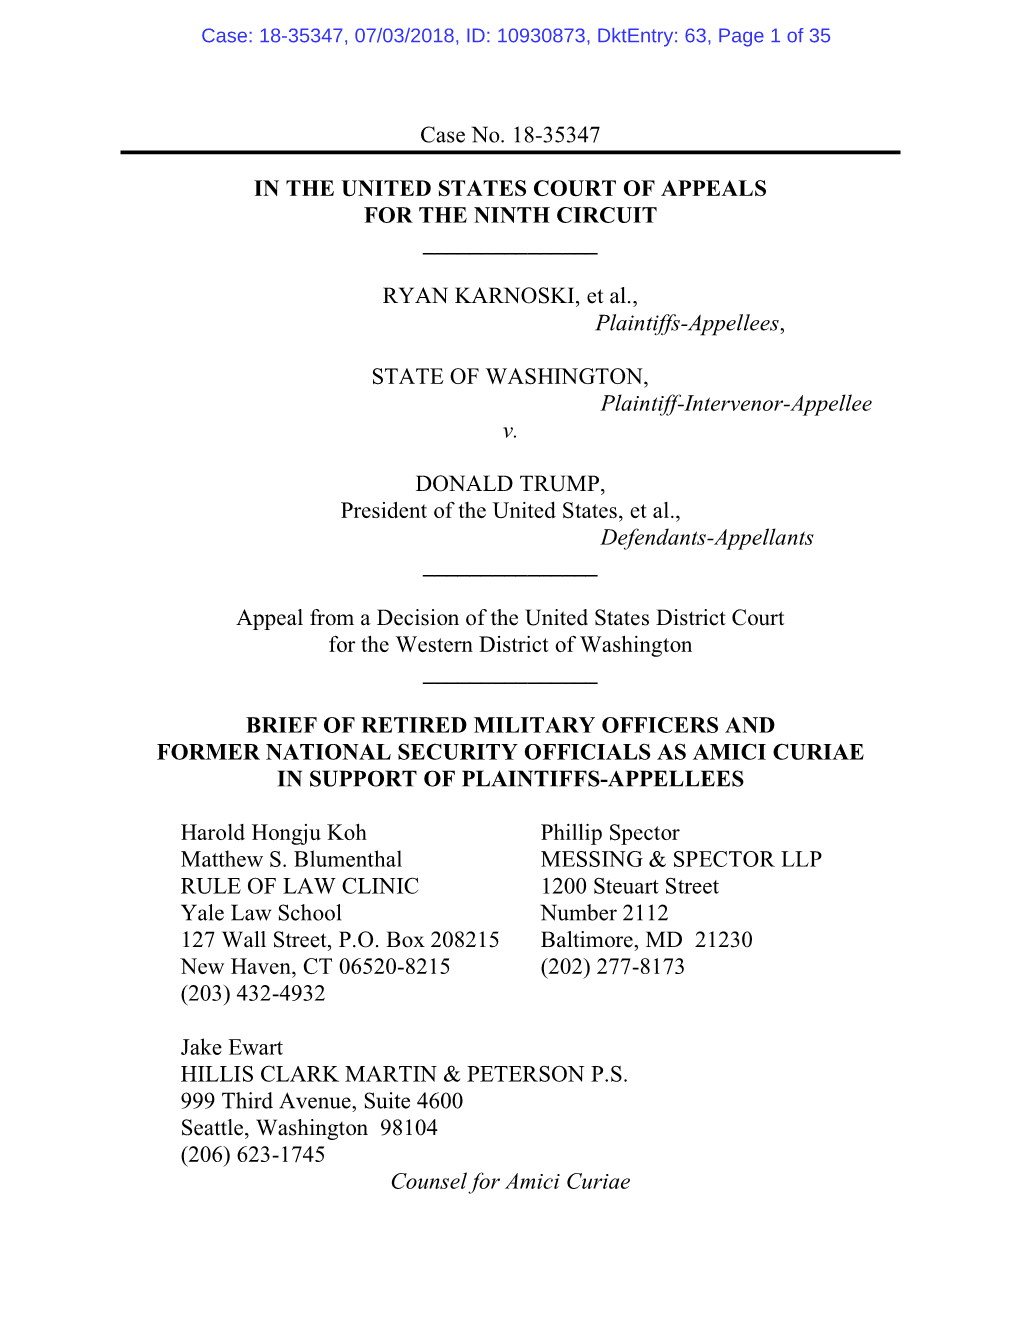 Case No. 18-35347 in the UNITED STATES COURT of APPEALS for the NINTH CIRCUIT RYAN KARNOSKI, Et Al., Plaintiffs